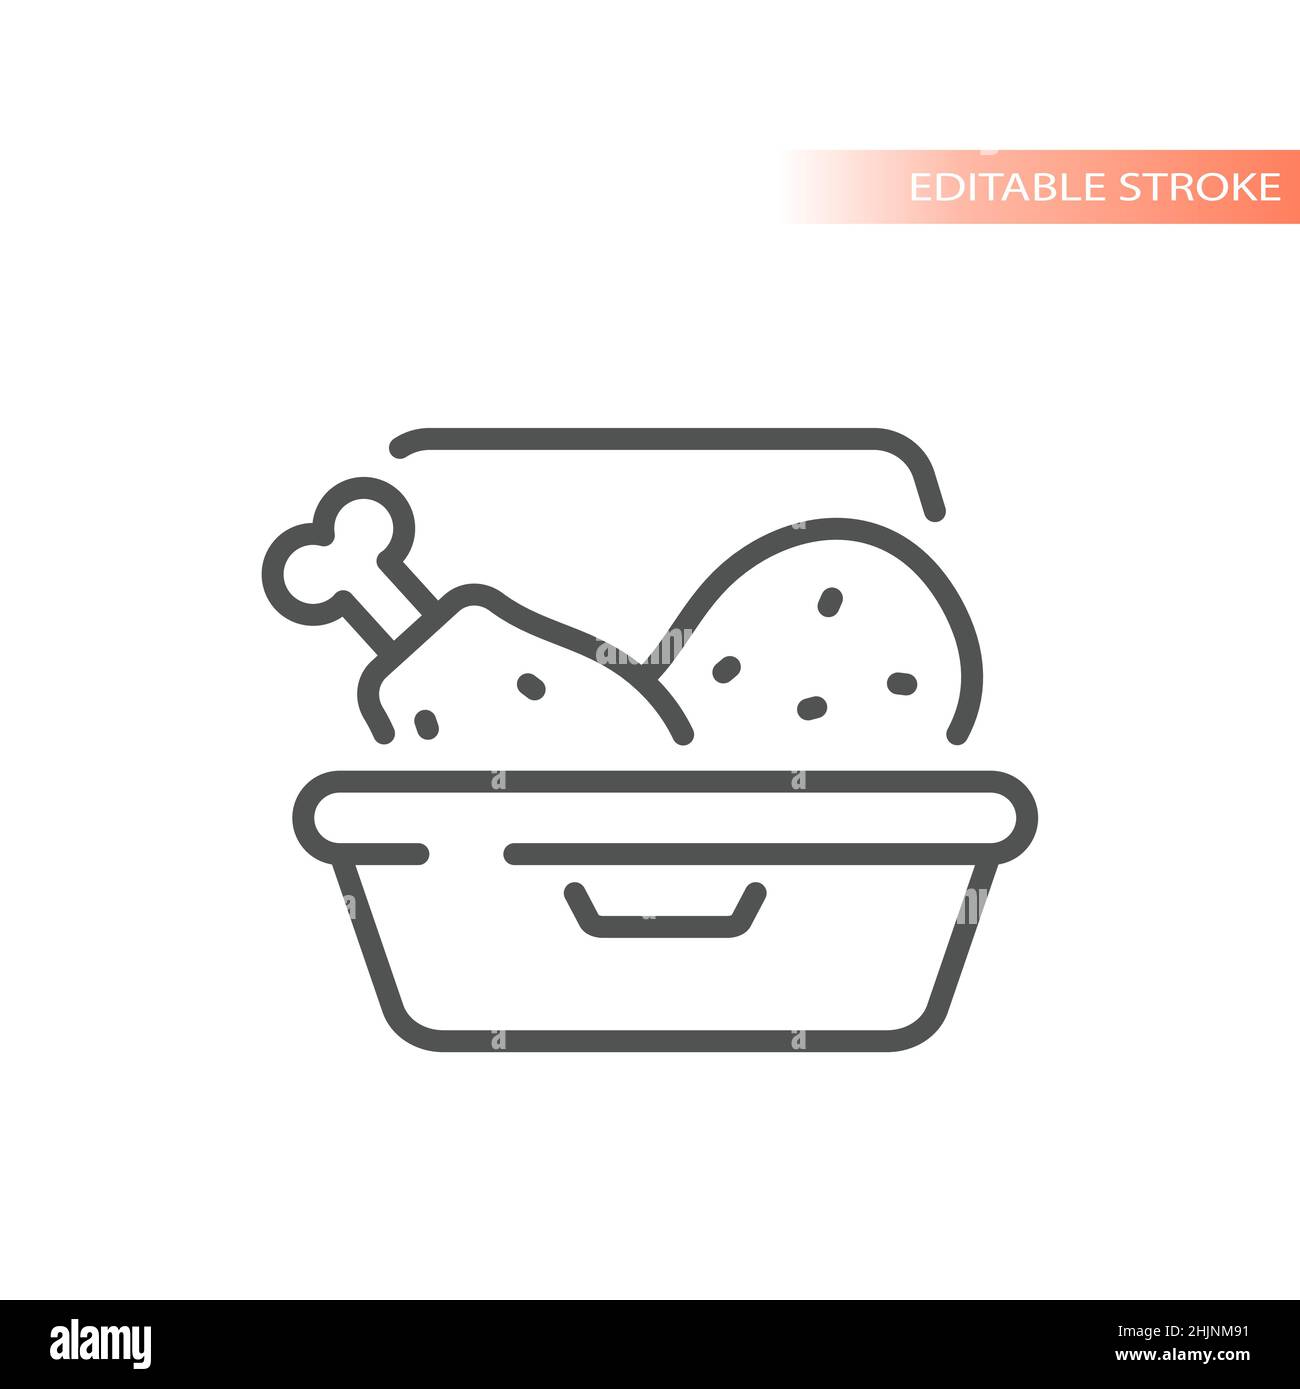 Takeaway Container: Over 34,011 Royalty-Free Licensable Stock Vectors &  Vector Art